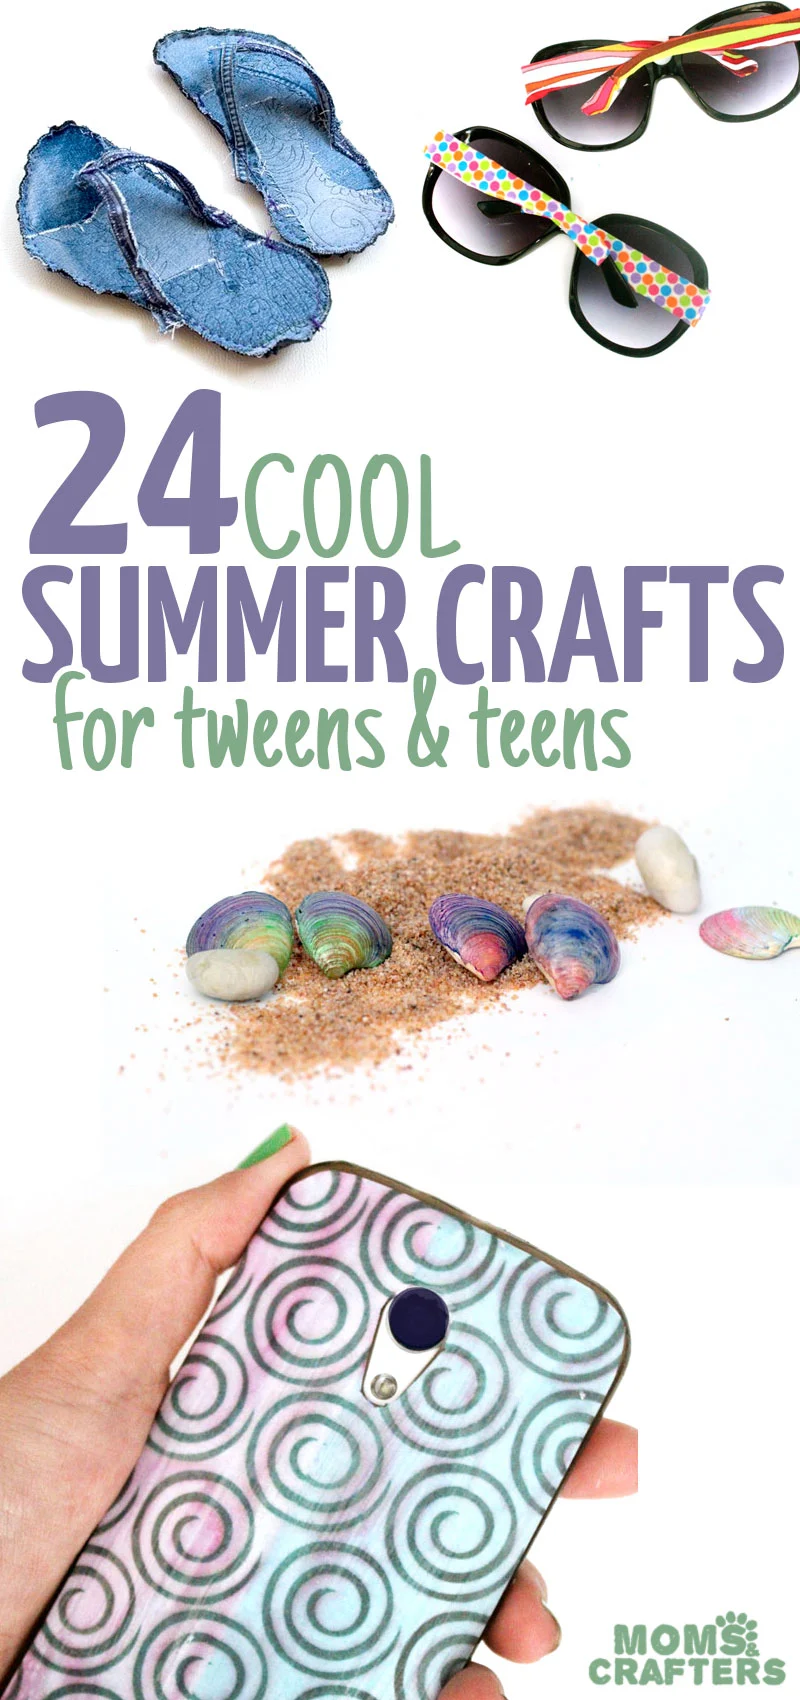 25 Cool summer crafts for teens and tweens are sure to keep them busy during these months! These summer camp crafts are perfect boredom busters in hot weather! from DIY sunglaees, to flip flops and tees, these are all totally awesome!